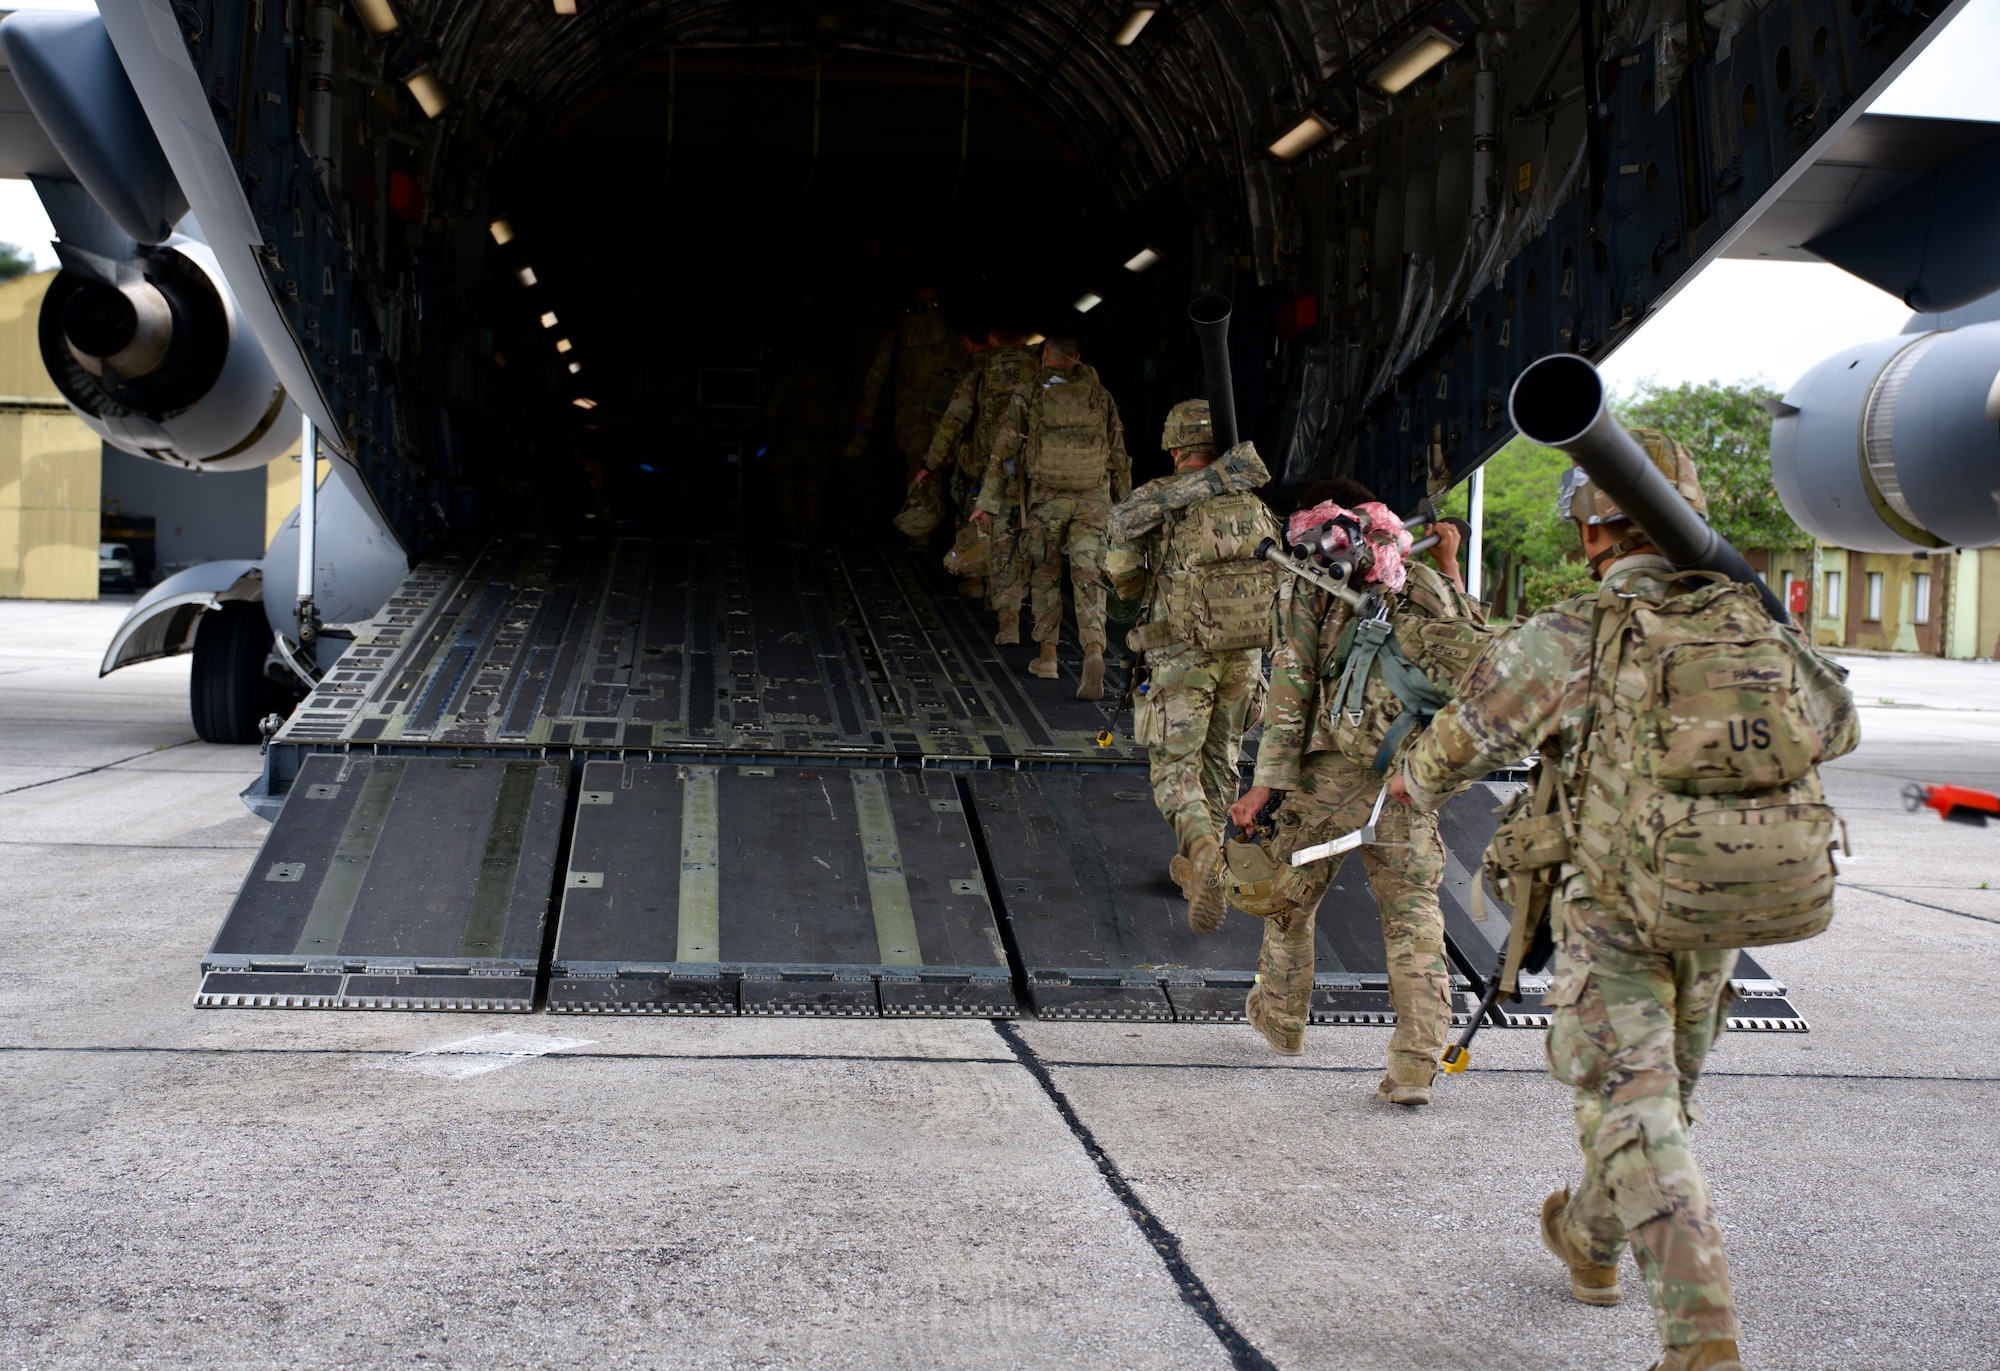 U.S. Army Soldiers assigned to the 173rd Airborne Brigade load onto a C-17 Globemaster III during Defender Europe 23 at Larissa Air Base, Greece, May 13, 2023. (U.S. Air Force photo by Capt. Emma Quirk)